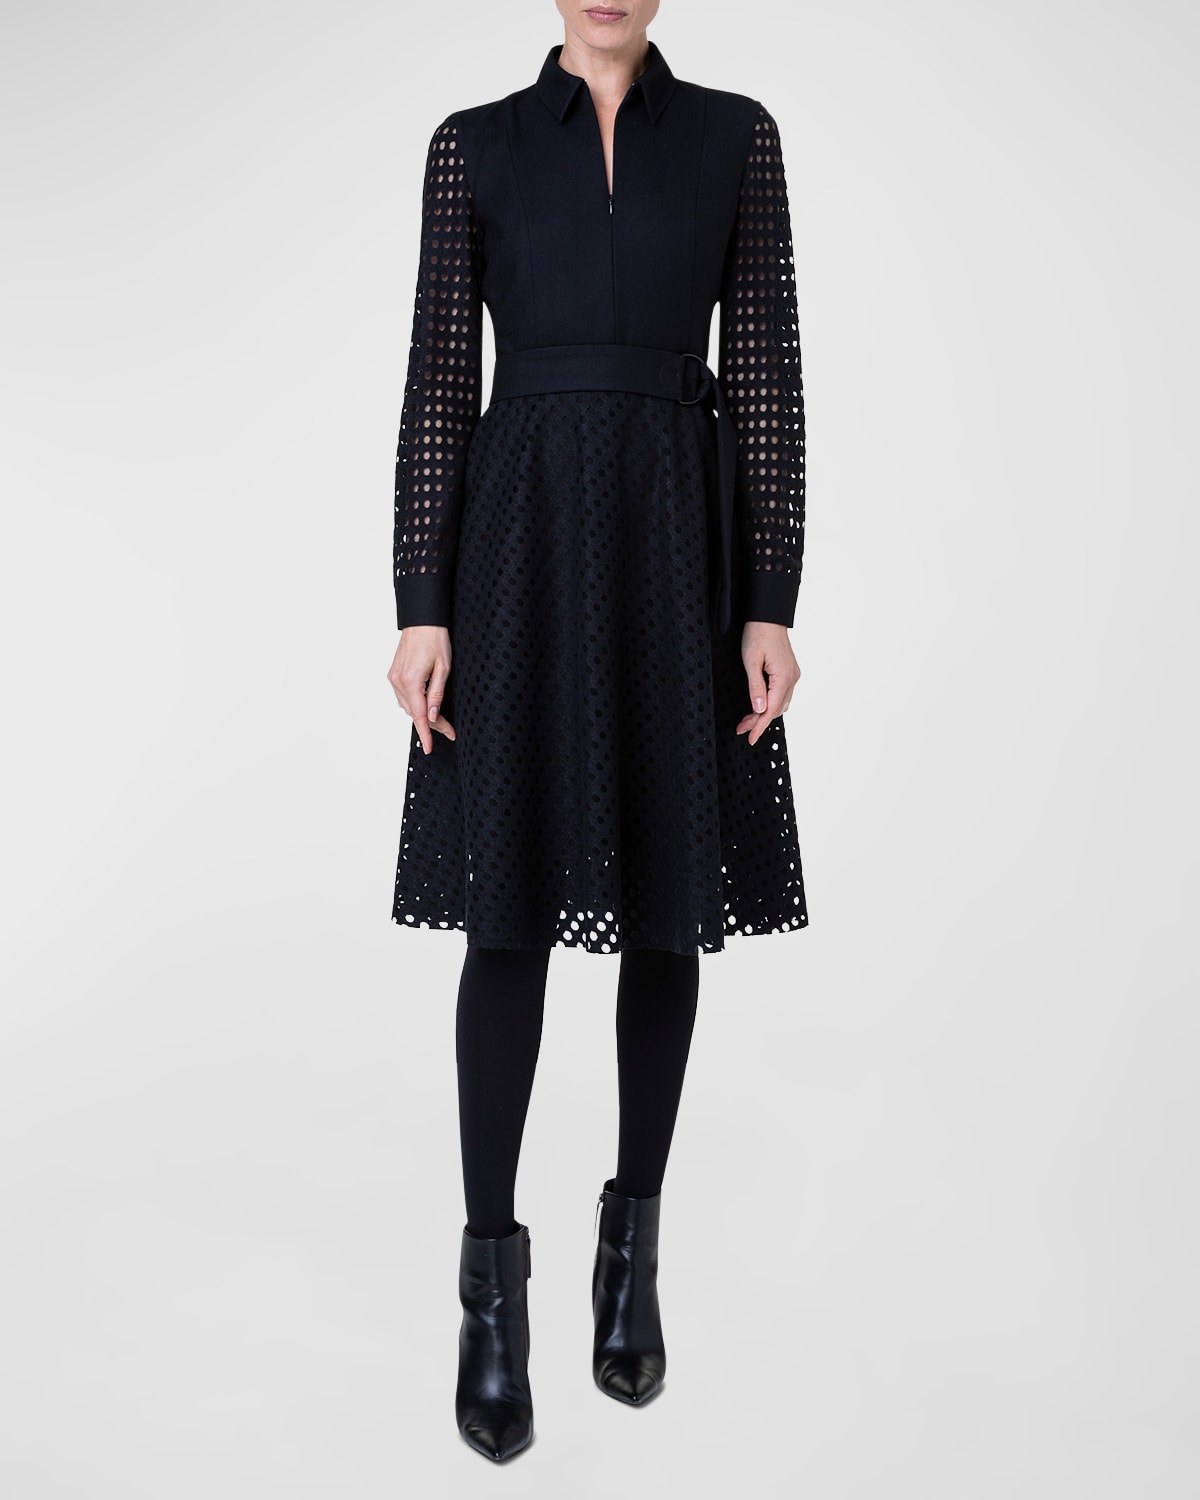 AKRIS PUNTO WOOL FLANNEL DRESS WITH VELVET BURN-OUT DOTTED DETAILS